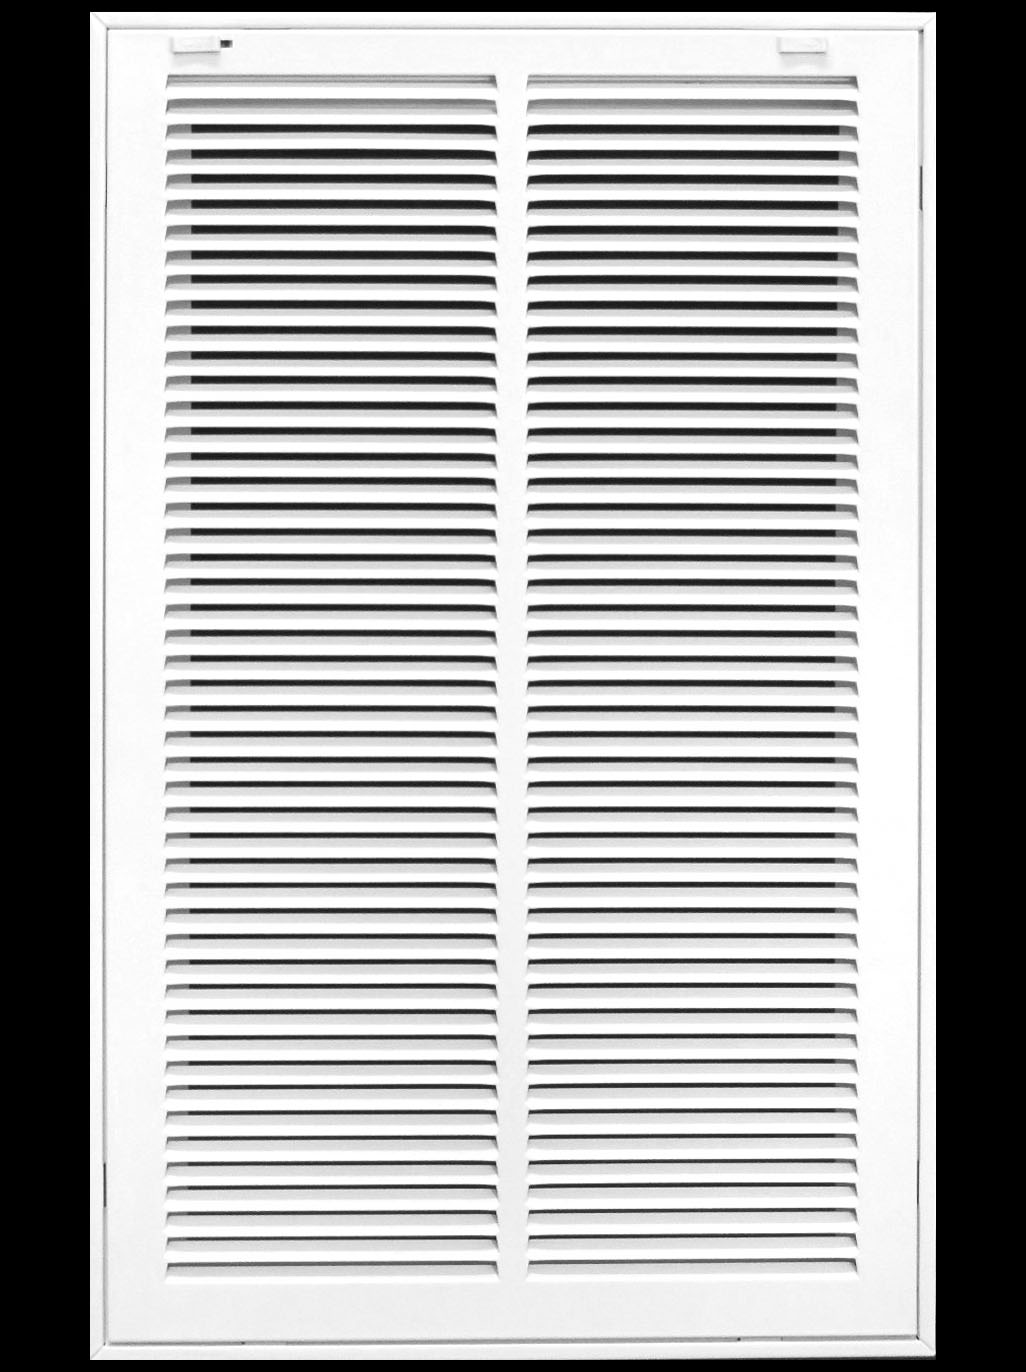 14&quot; X 25&quot; Steel Return Air Filter Grille for 1&quot; Filter - Removable Frame - [Outer Dimensions: 16 5/8&quot; X 27 5/8&quot;]